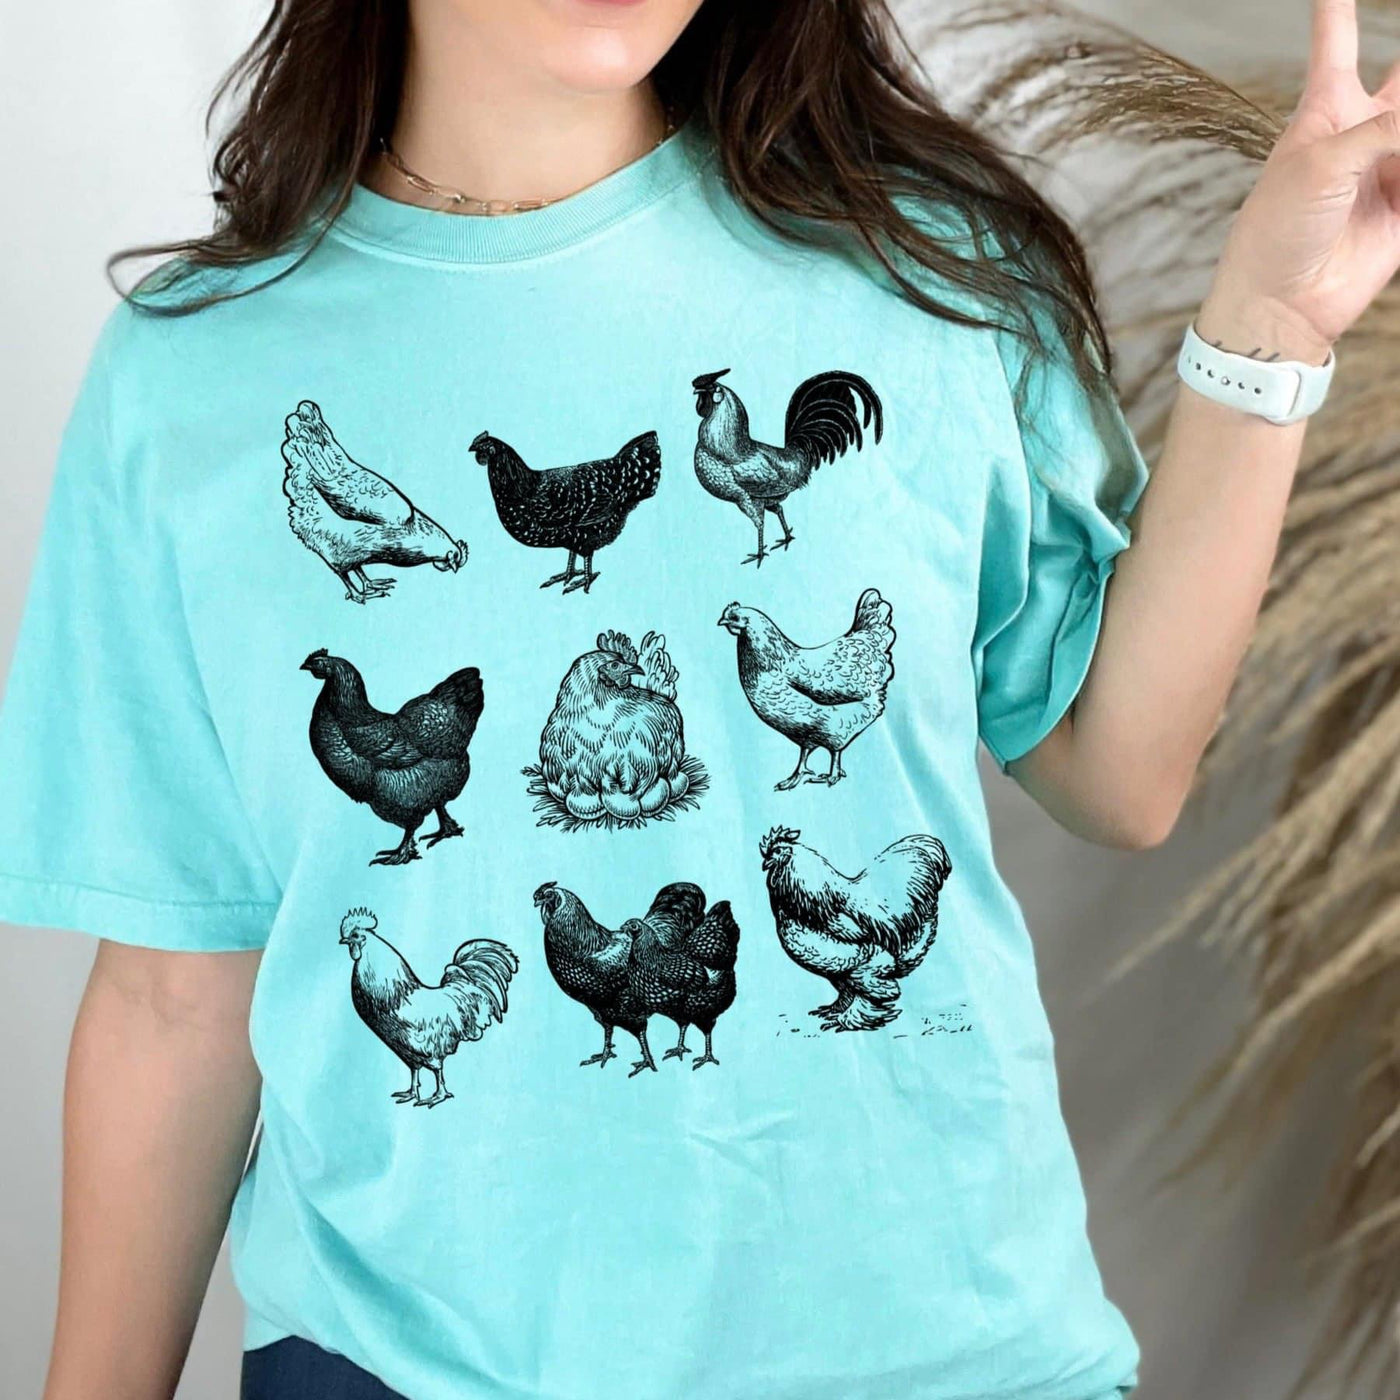 READY TO SHIP "Chicken Collage" T-shirt